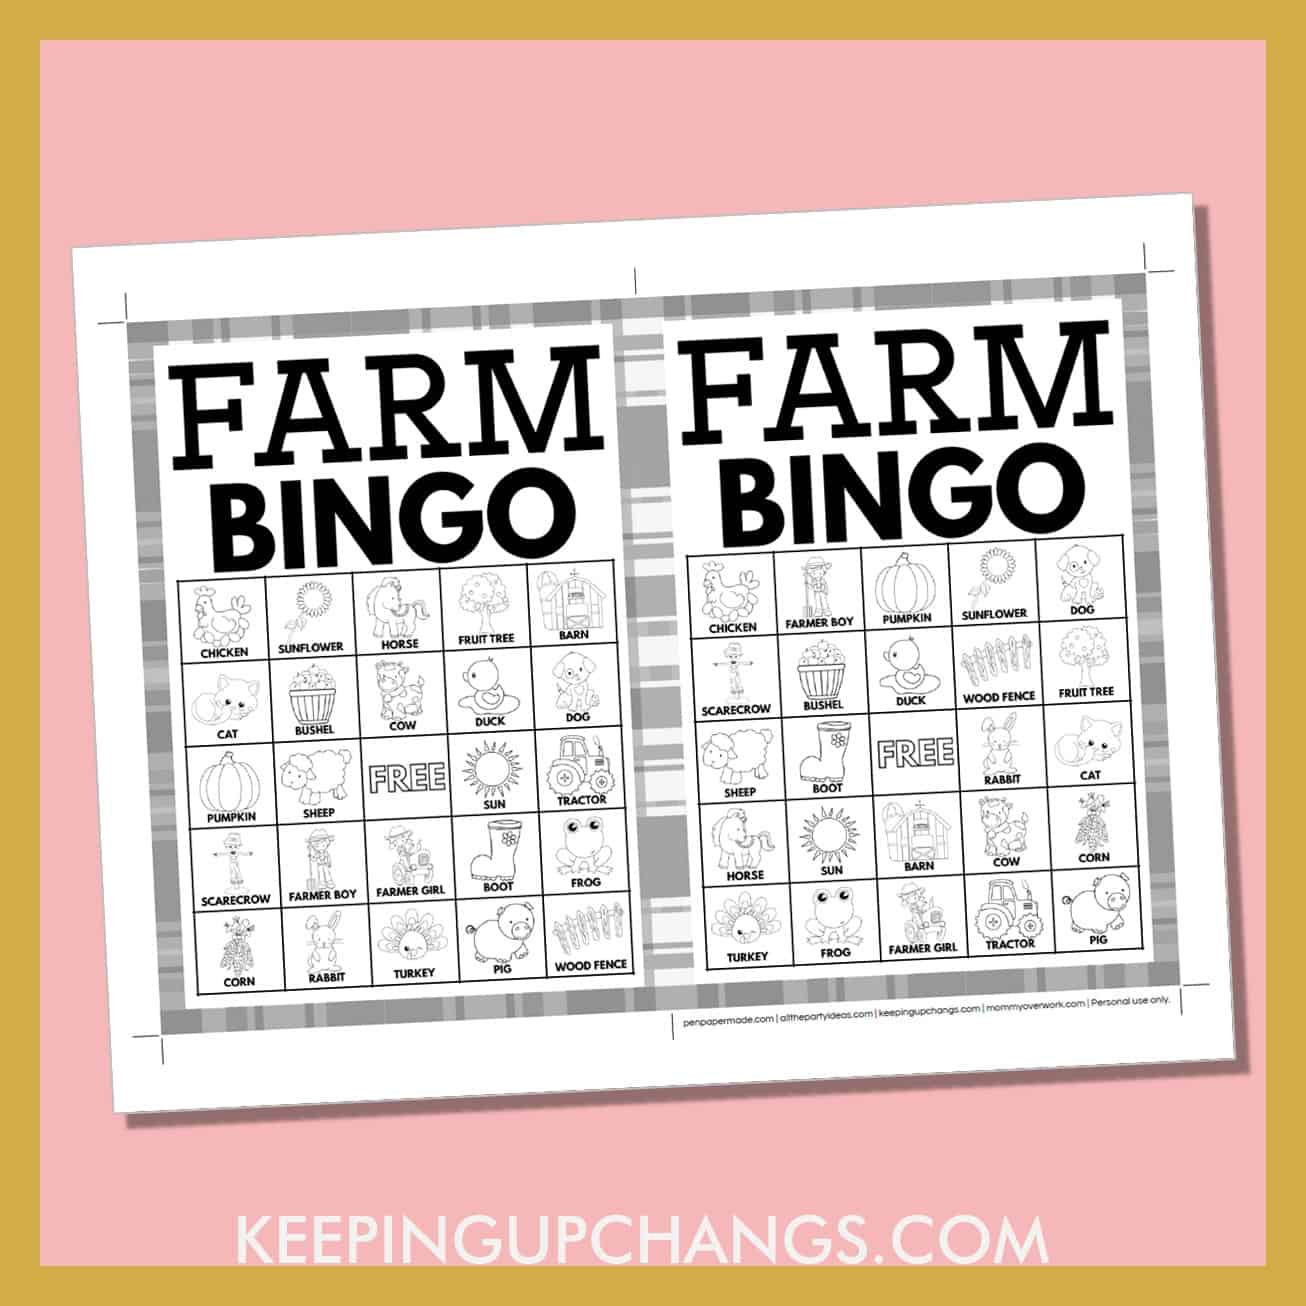 free farm bingo card 5x5 5x7 game boards with black, white images and text words.